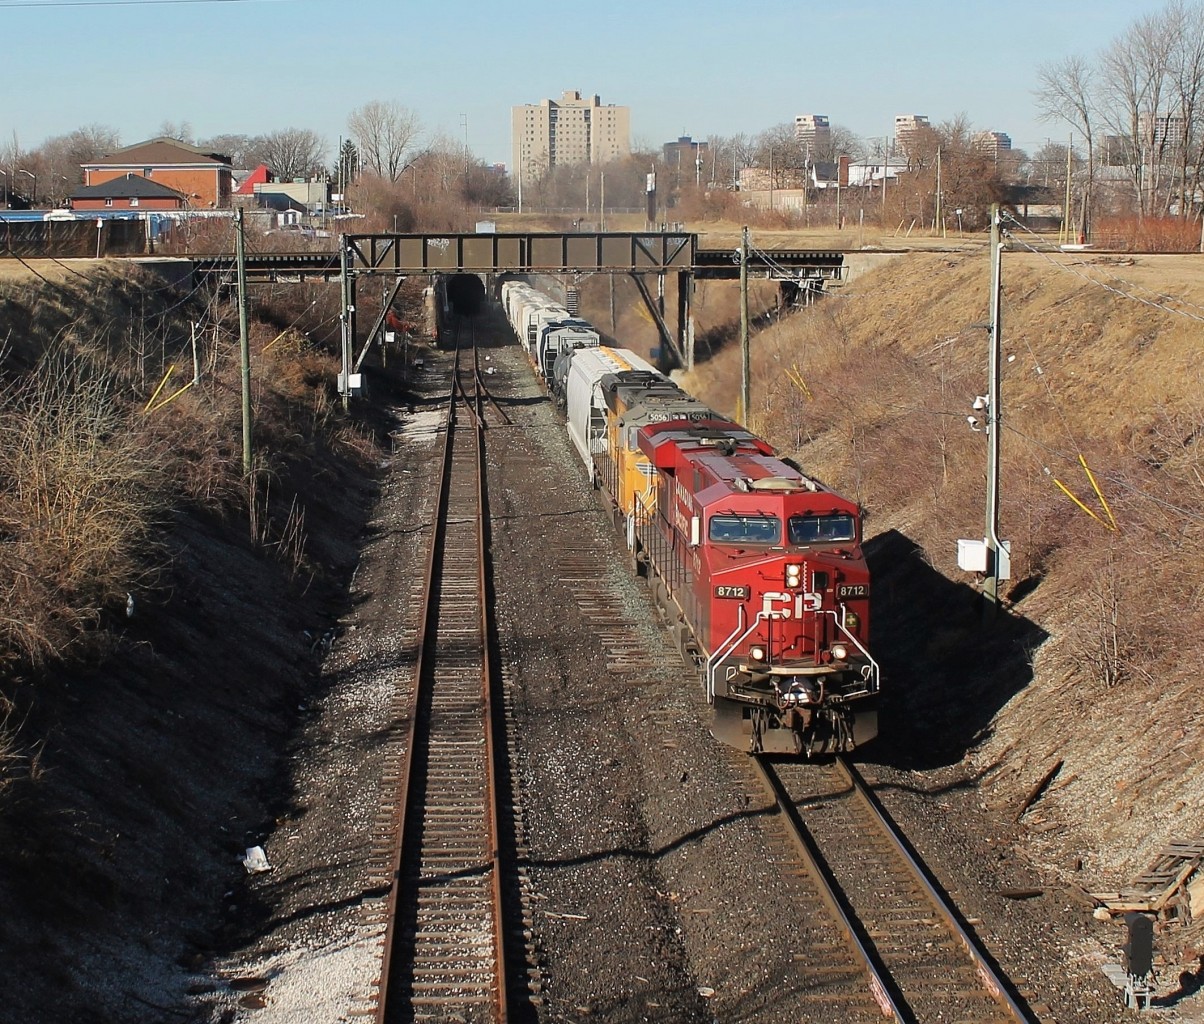 CP 240 emerges from the Detroit River rail tunnel on a sunny Saturday afternoon. About 3 minutes earlier, an ETR local passed over the bridge in the background. One day I will get an over/under meet here between CP and ETR. The tunnel between Windsor and Detroit was built in 1910 by the Michigan Central Railroad and has gone through some major transformations, and different owners over the years. Today CP owns the tunnel and is the only railroad that uses it regularly, compared to a few decades ago when multiple railroads ran trains through it. The tunnel was enlarged in 1994 to accommodate excess height traffic, but still cannot handle large cubed double stack intermodal.